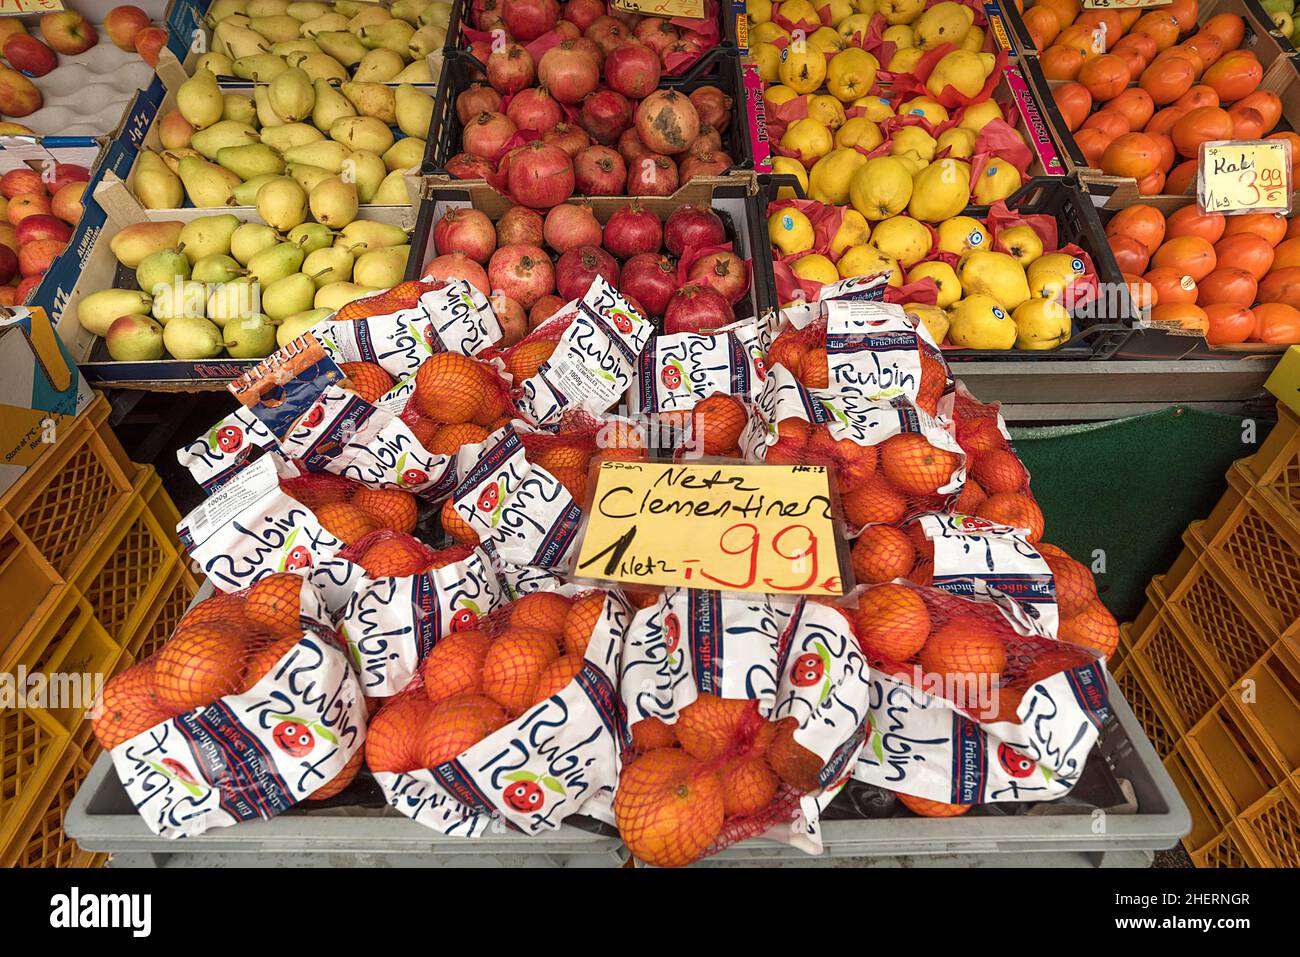 Clementines in a net and different fruit varieties at a market stall, Bavaria, Germany Stock Photo